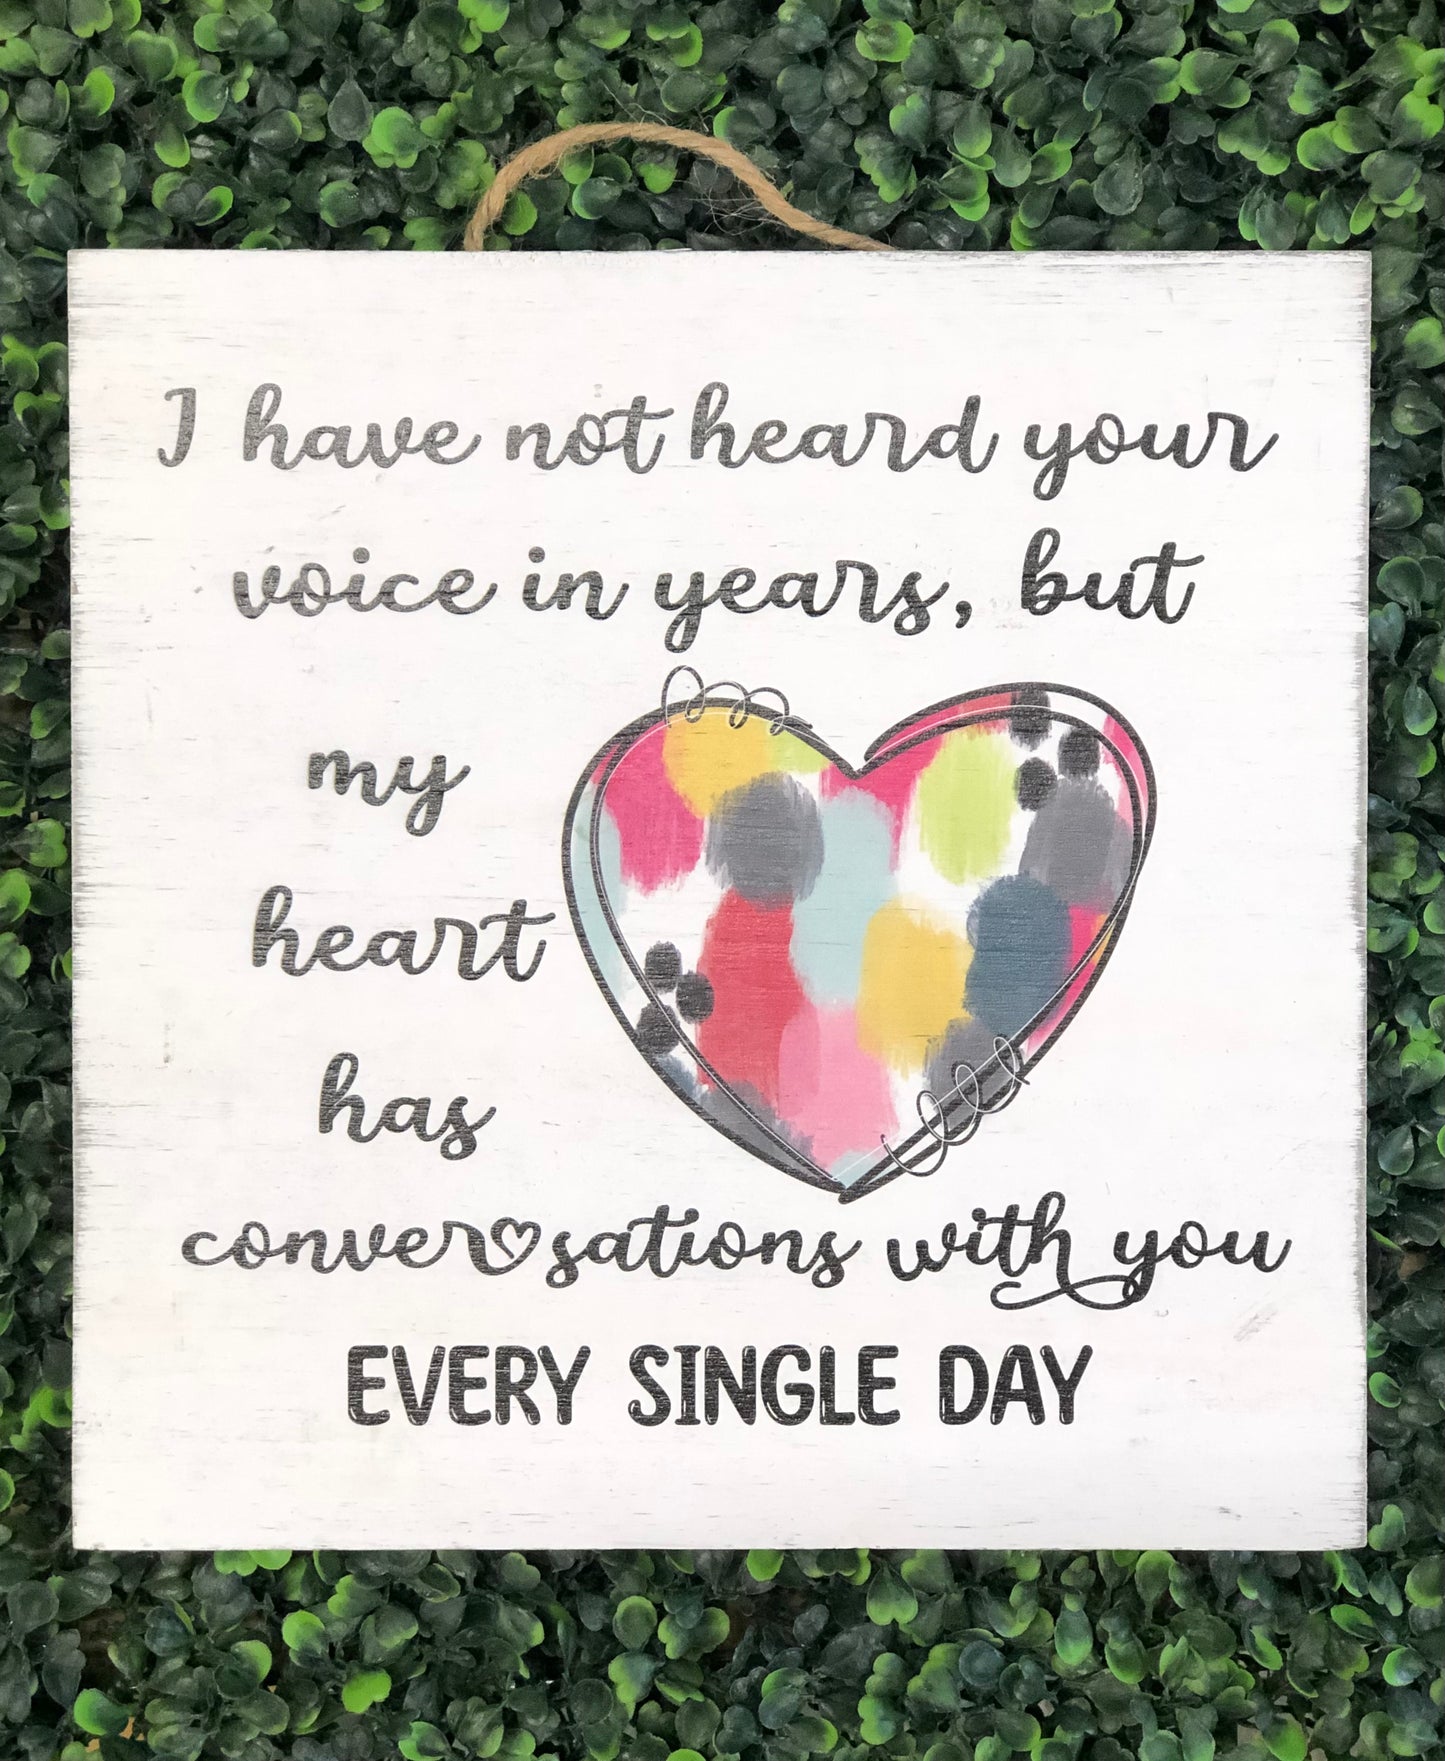 10" x 10" Not heard your voice wooden sign